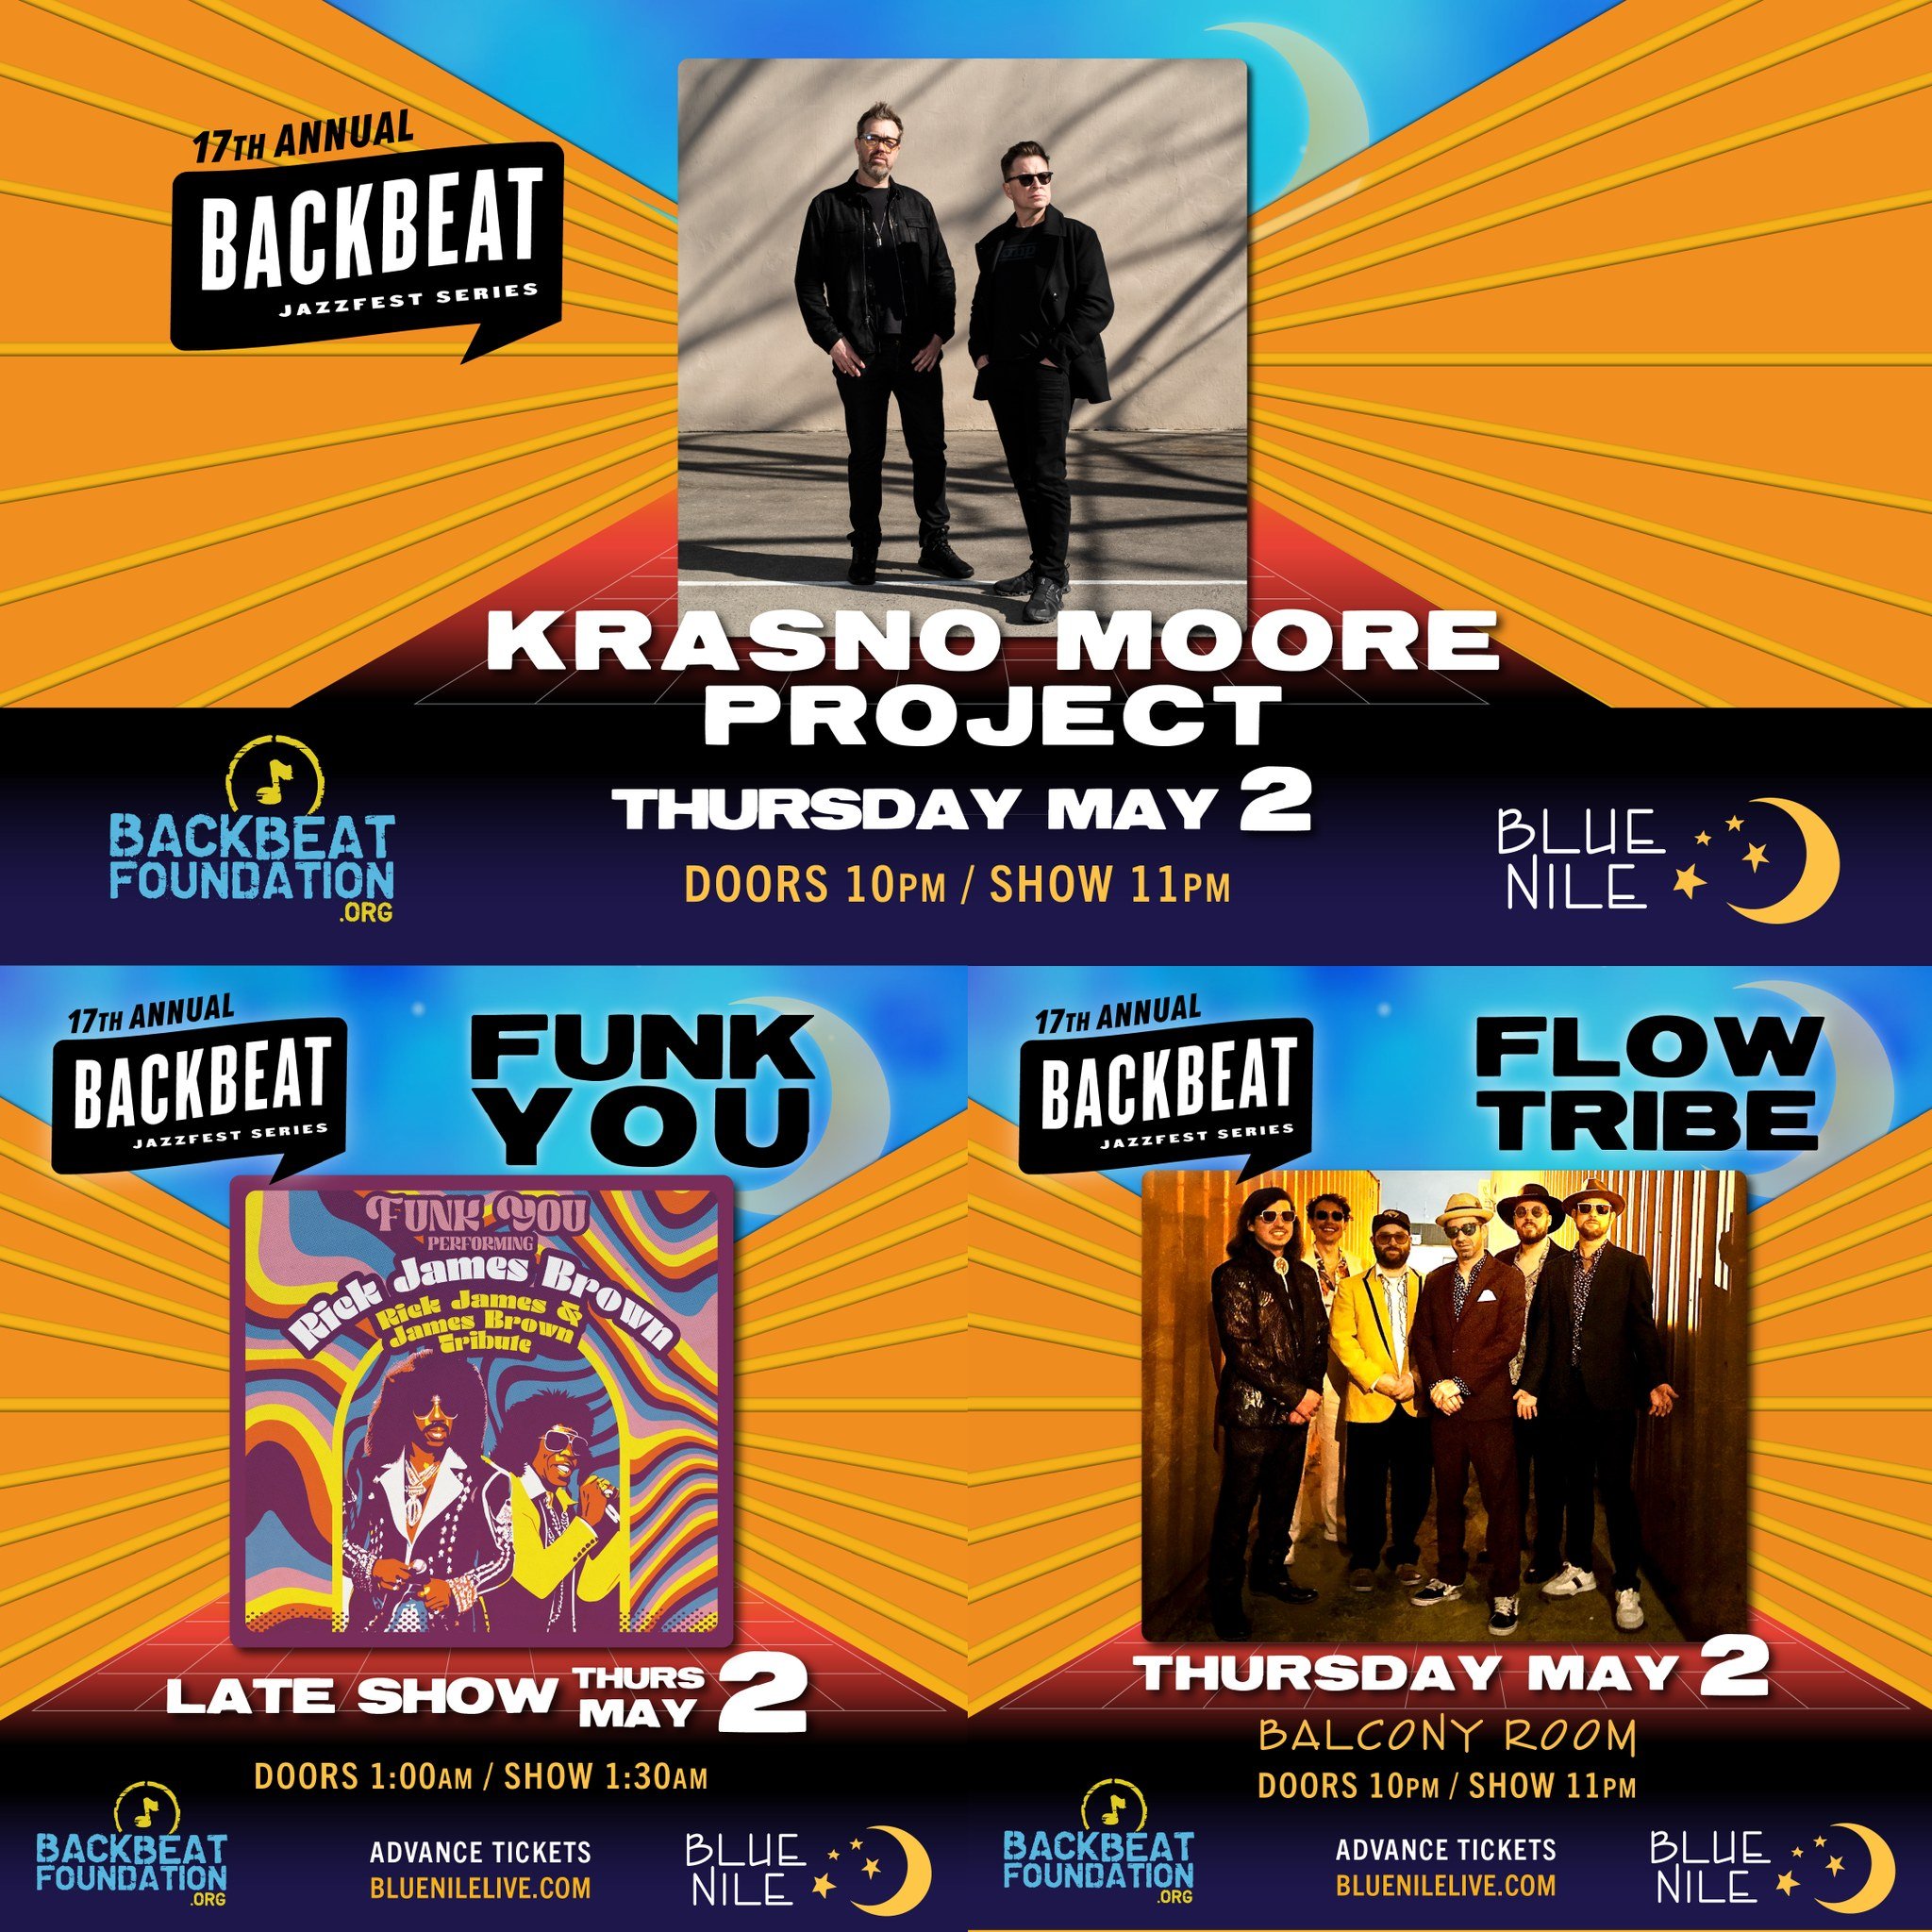 TONIGHT! Krasno Moore Project, Funk You Plays Rick James Brown, and Flow Tribe!
✨🌙 Advance tickets at bluenilelive.com

Where Ya At Brass Band 7PM, Free Admission.

@backbeatfoundation #jazzfestivus #jazzfest2024 #aftershow #bluenilenola #frenchmens